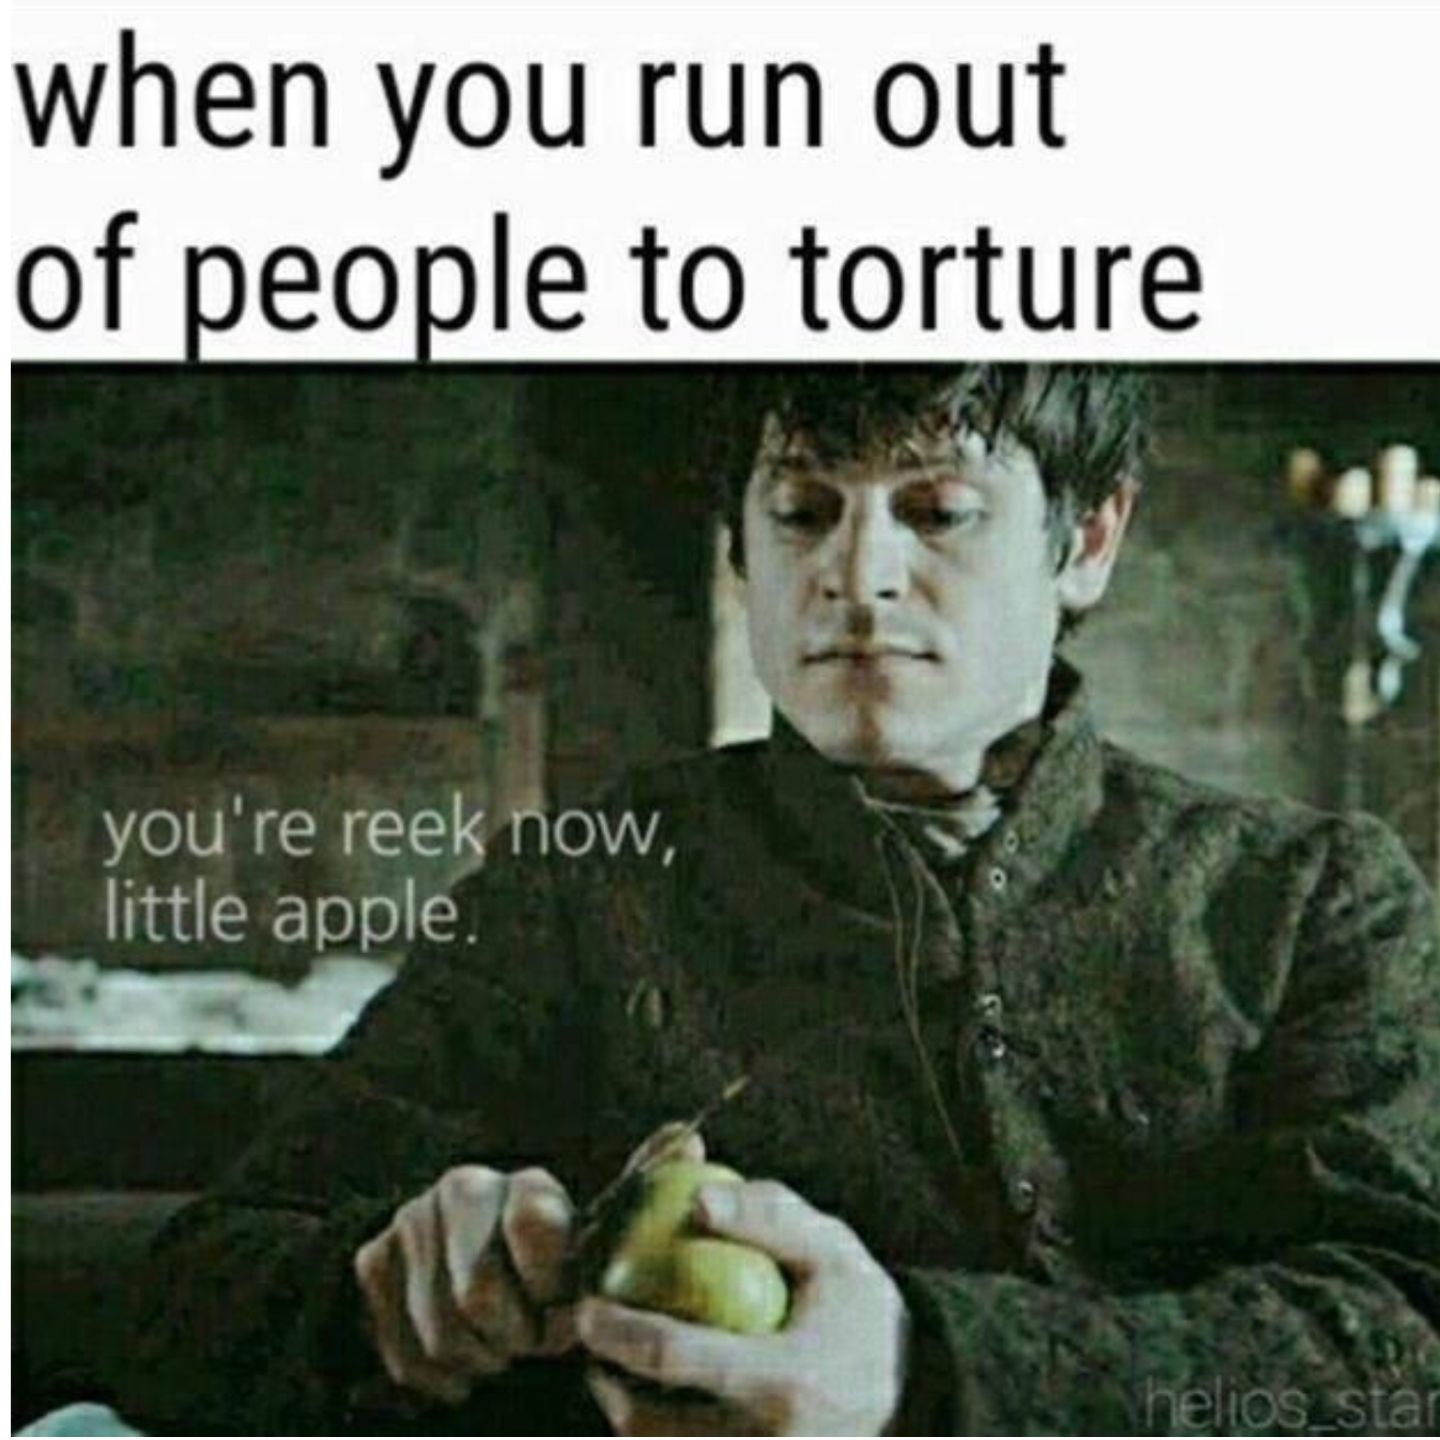 Meme about Ramsay Bolton not being able to torture from Game of Thrones. 